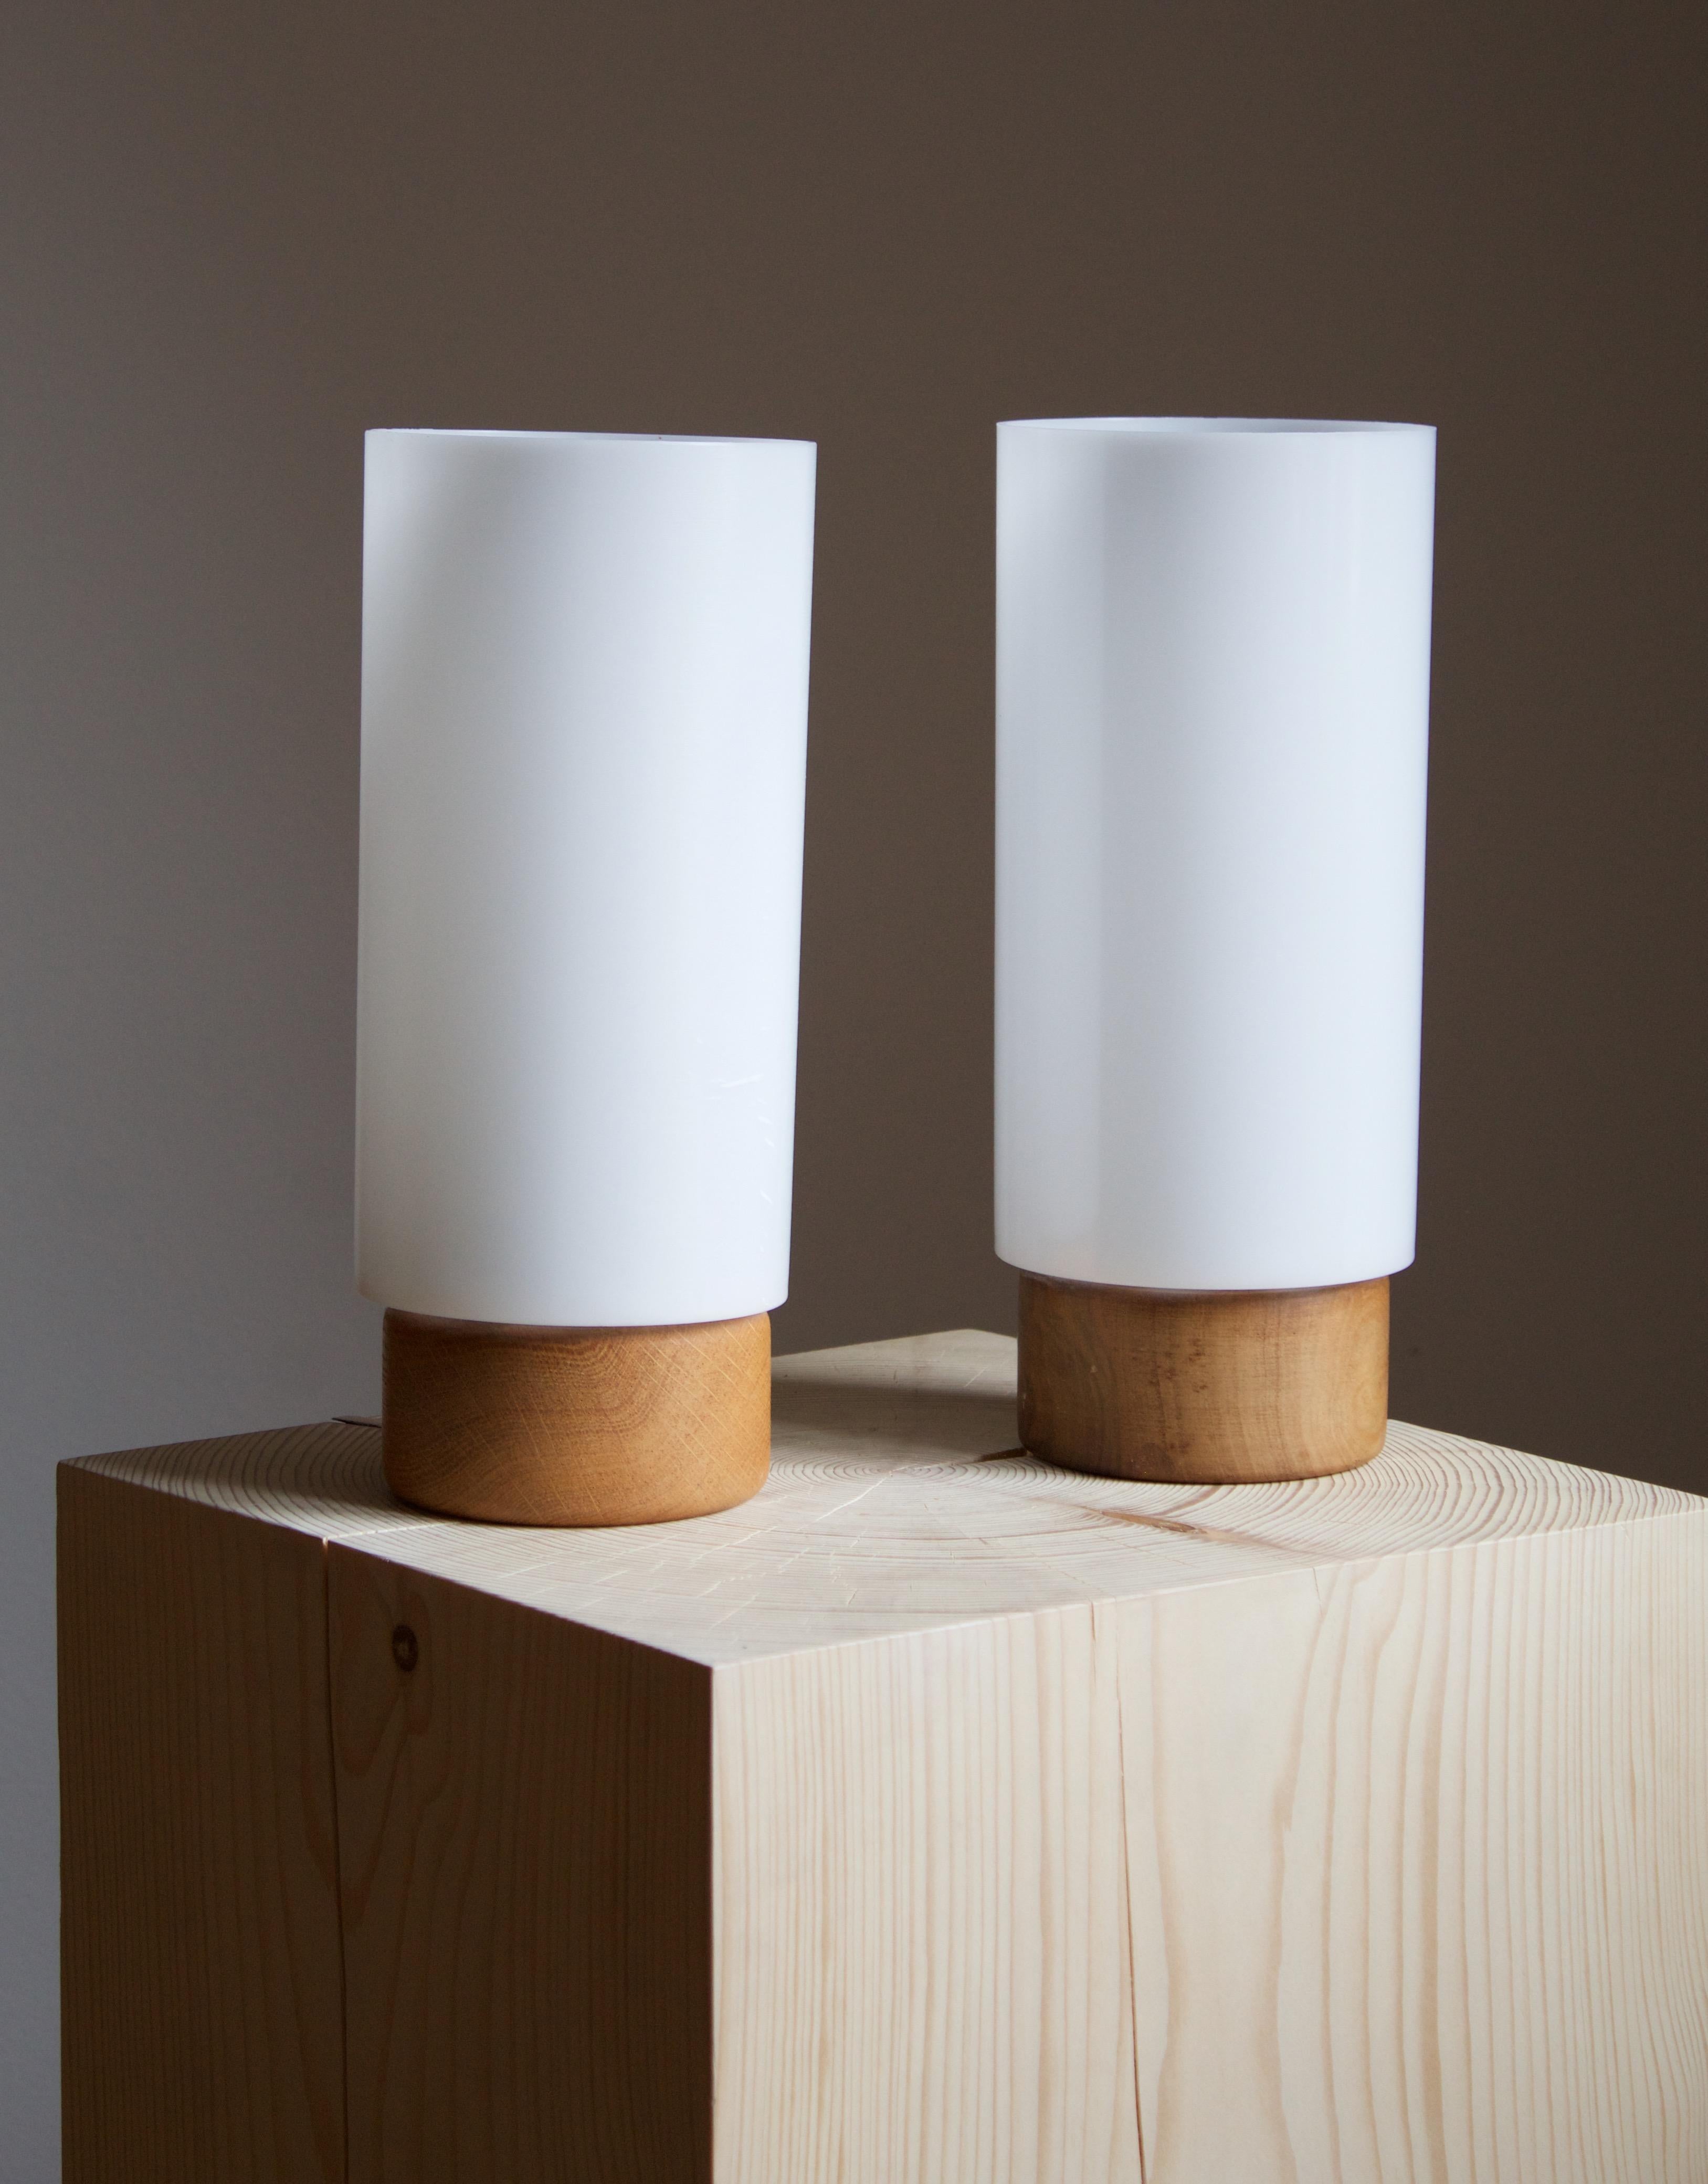 A pair of pine / acrylic table lamps. Designed by Uno Kristiansson, for Luxus, Sweden, 1960s.

Other designers of the period include Axel Einar Hjorth, Roland Wilhelmsson, Charlotte Perriand, Pierre Chapo, and Yasha Heifetz.